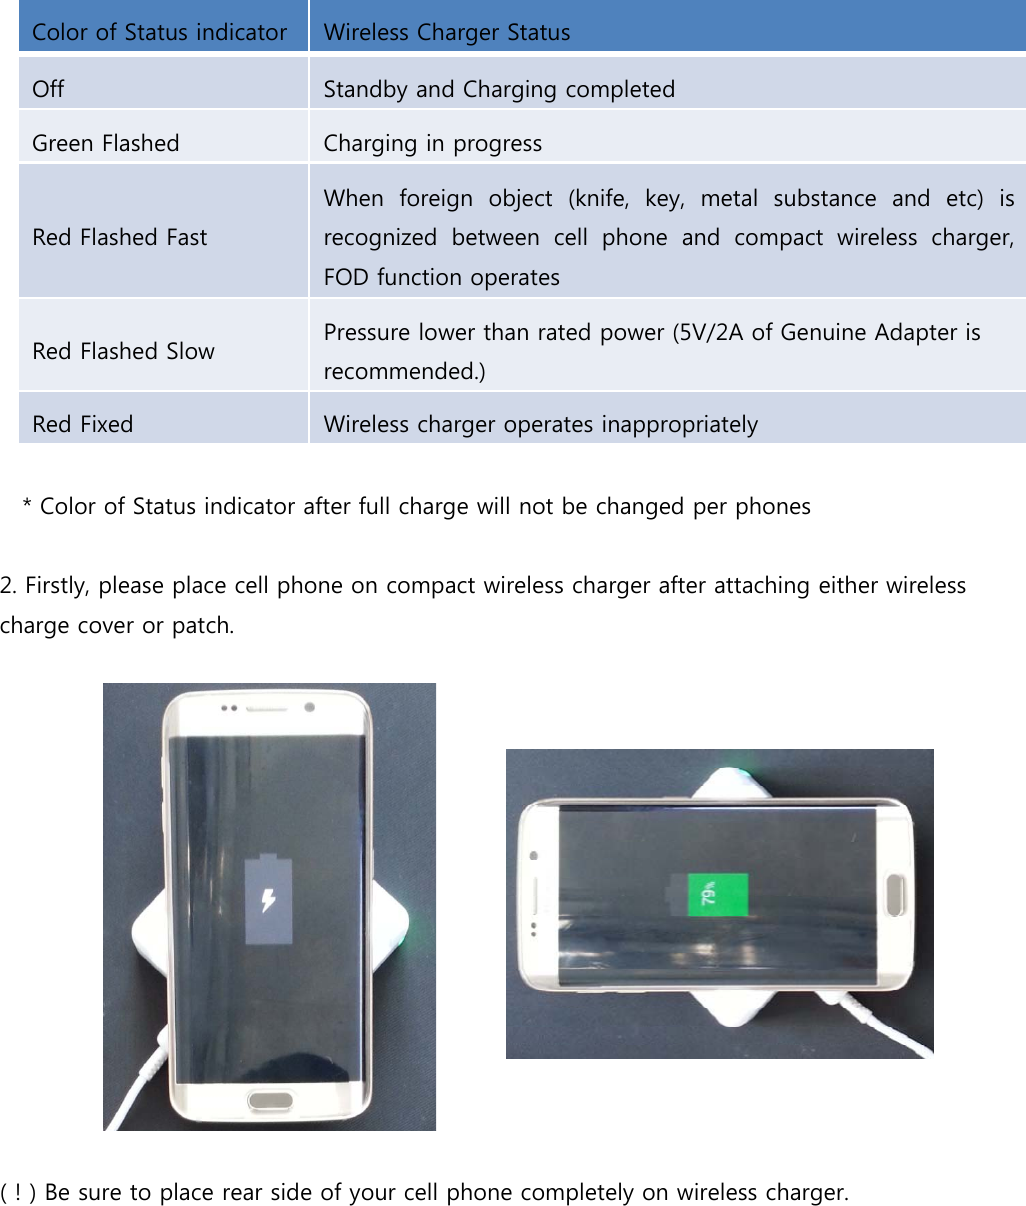  Color of Status indicator  Wireless Charger Status Off  Standby and Charging completed Green Flashed  Charging in progress Red Flashed Fast When  foreign  object  (knife,  key,  metal  substance  and  etc)  is recognized  between  cell  phone  and  compact  wireless  charger, FOD function operates Red Flashed Slow  Pressure lower than rated power (5V/2A of Genuine Adapter is recommended.) Red Fixed  Wireless charger operates inappropriately  * Color of Status indicator after full charge will not be changed per phones  2. Firstly, please place cell phone on compact wireless charger after attaching either wireless charge cover or patch.          ( ! ) Be sure to place rear side of your cell phone completely on wireless charger.    